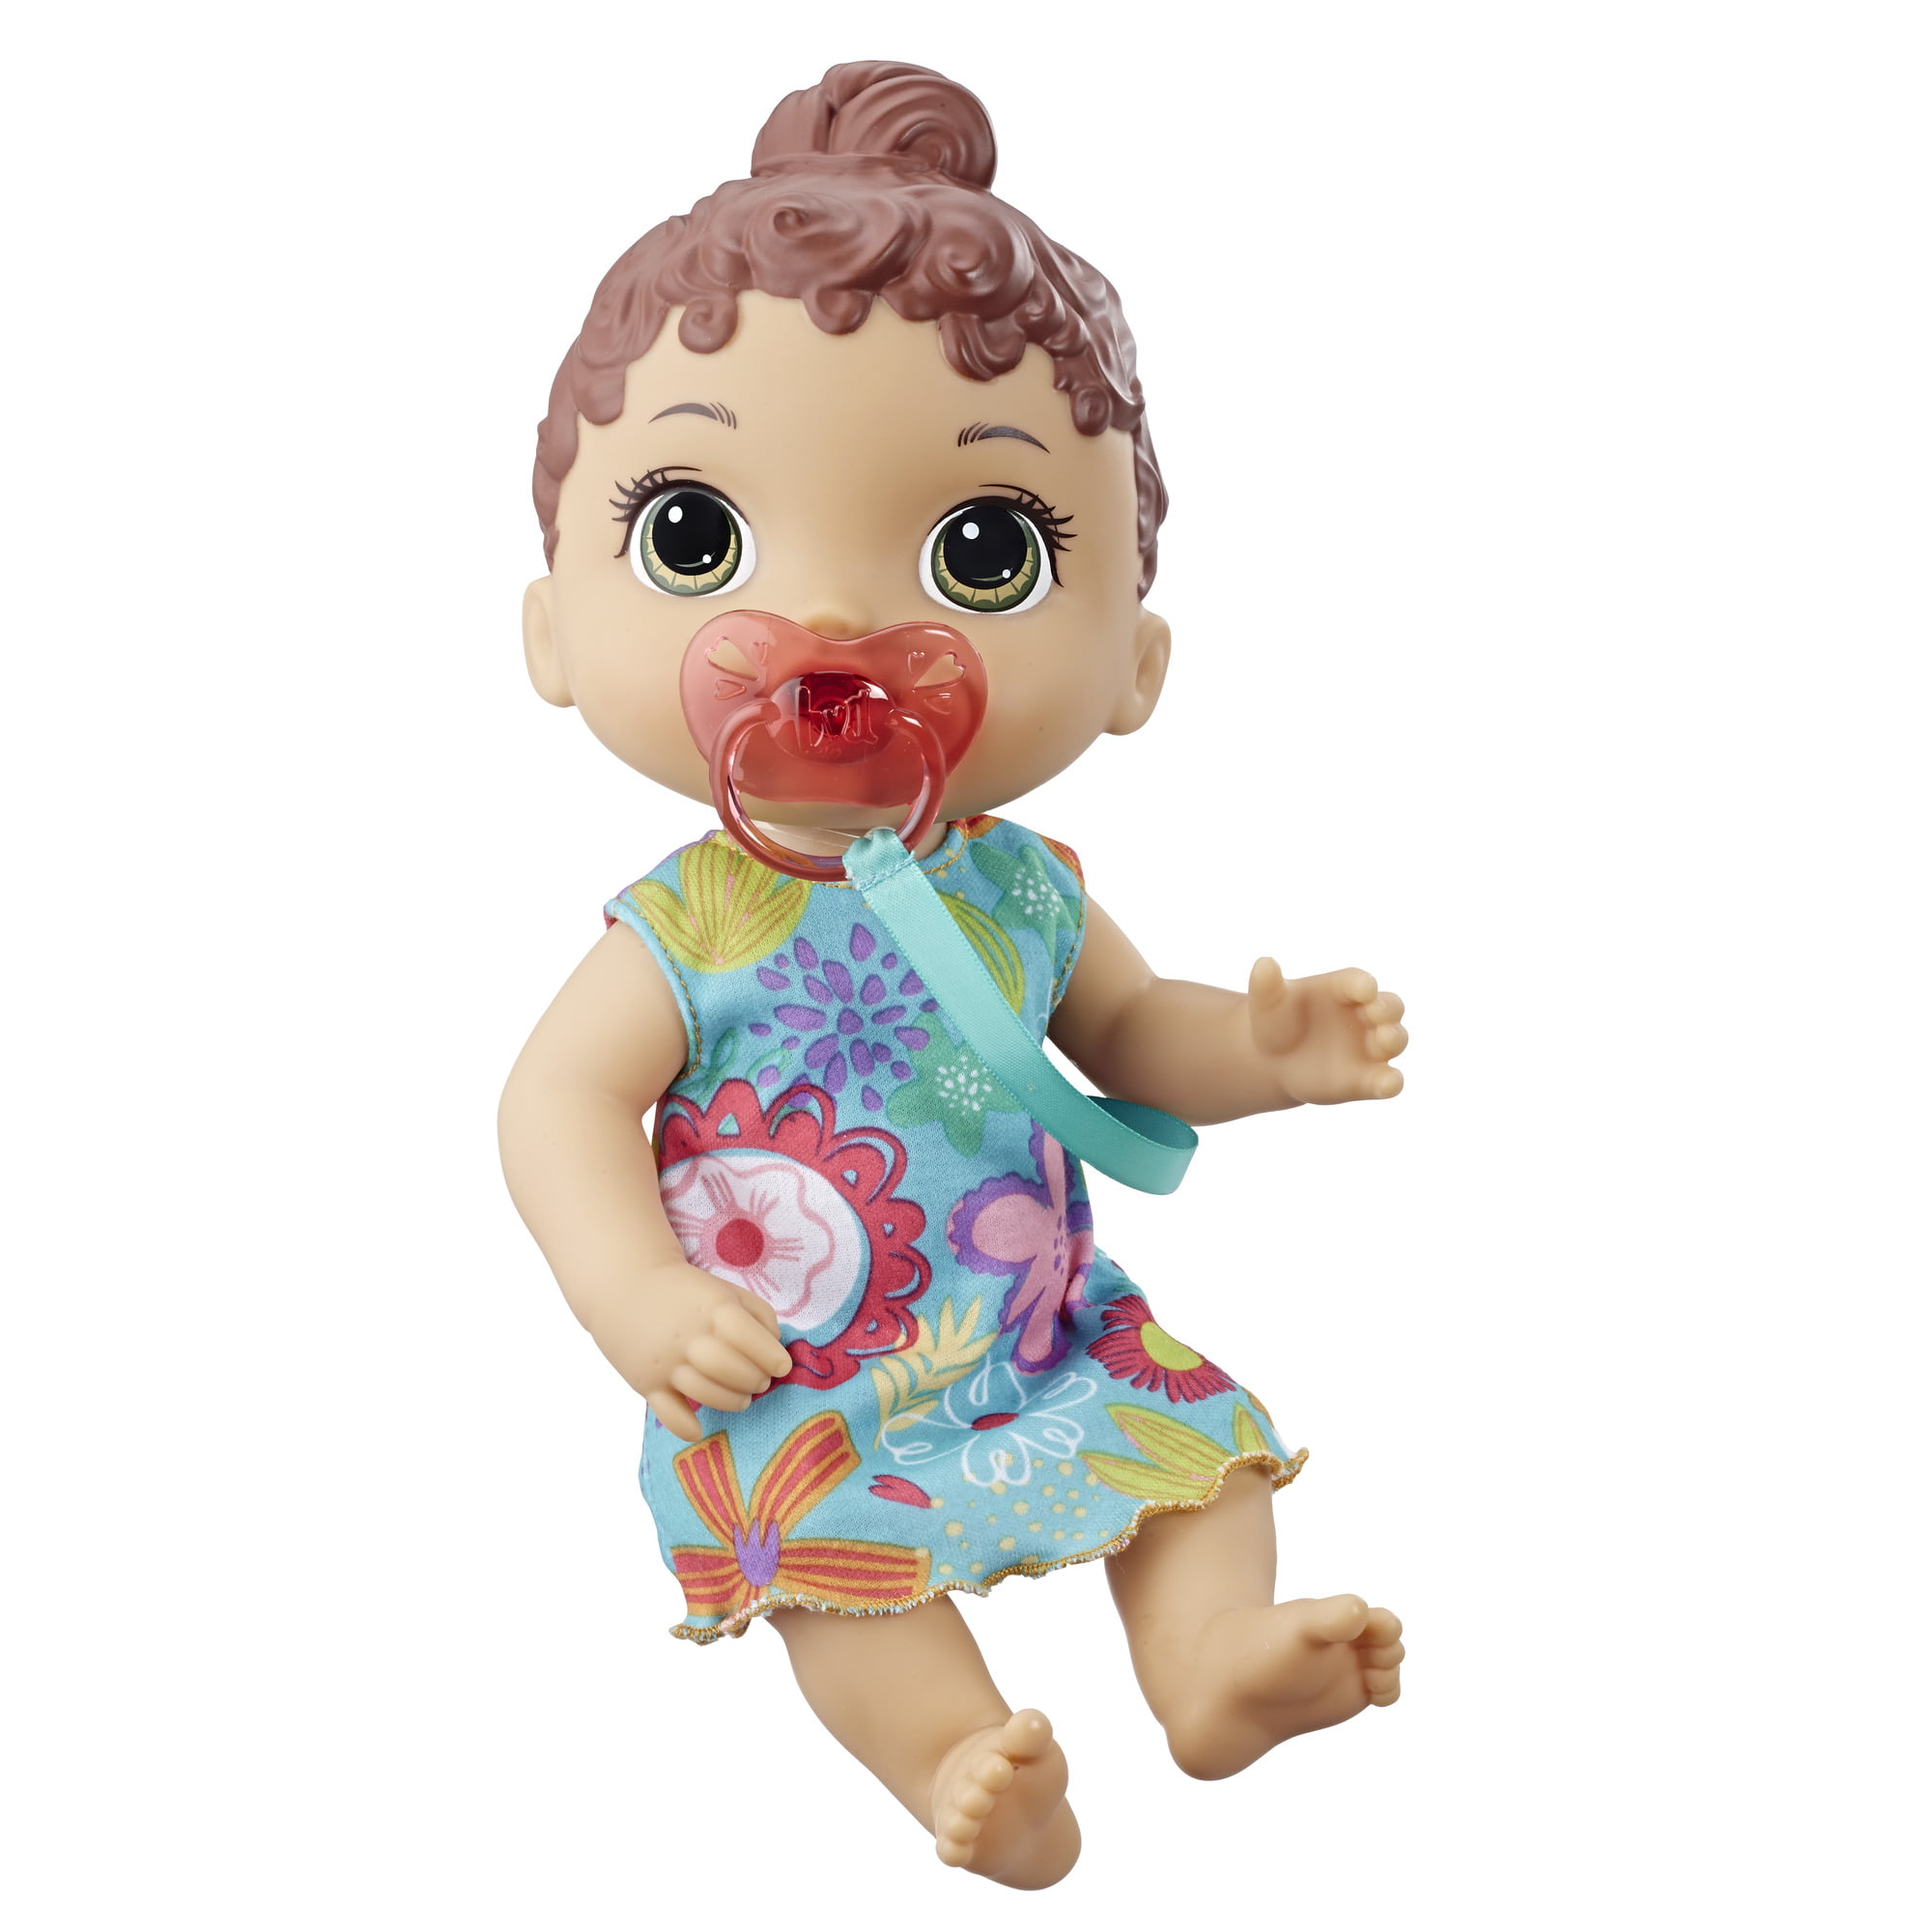 baby alive dolls that look real